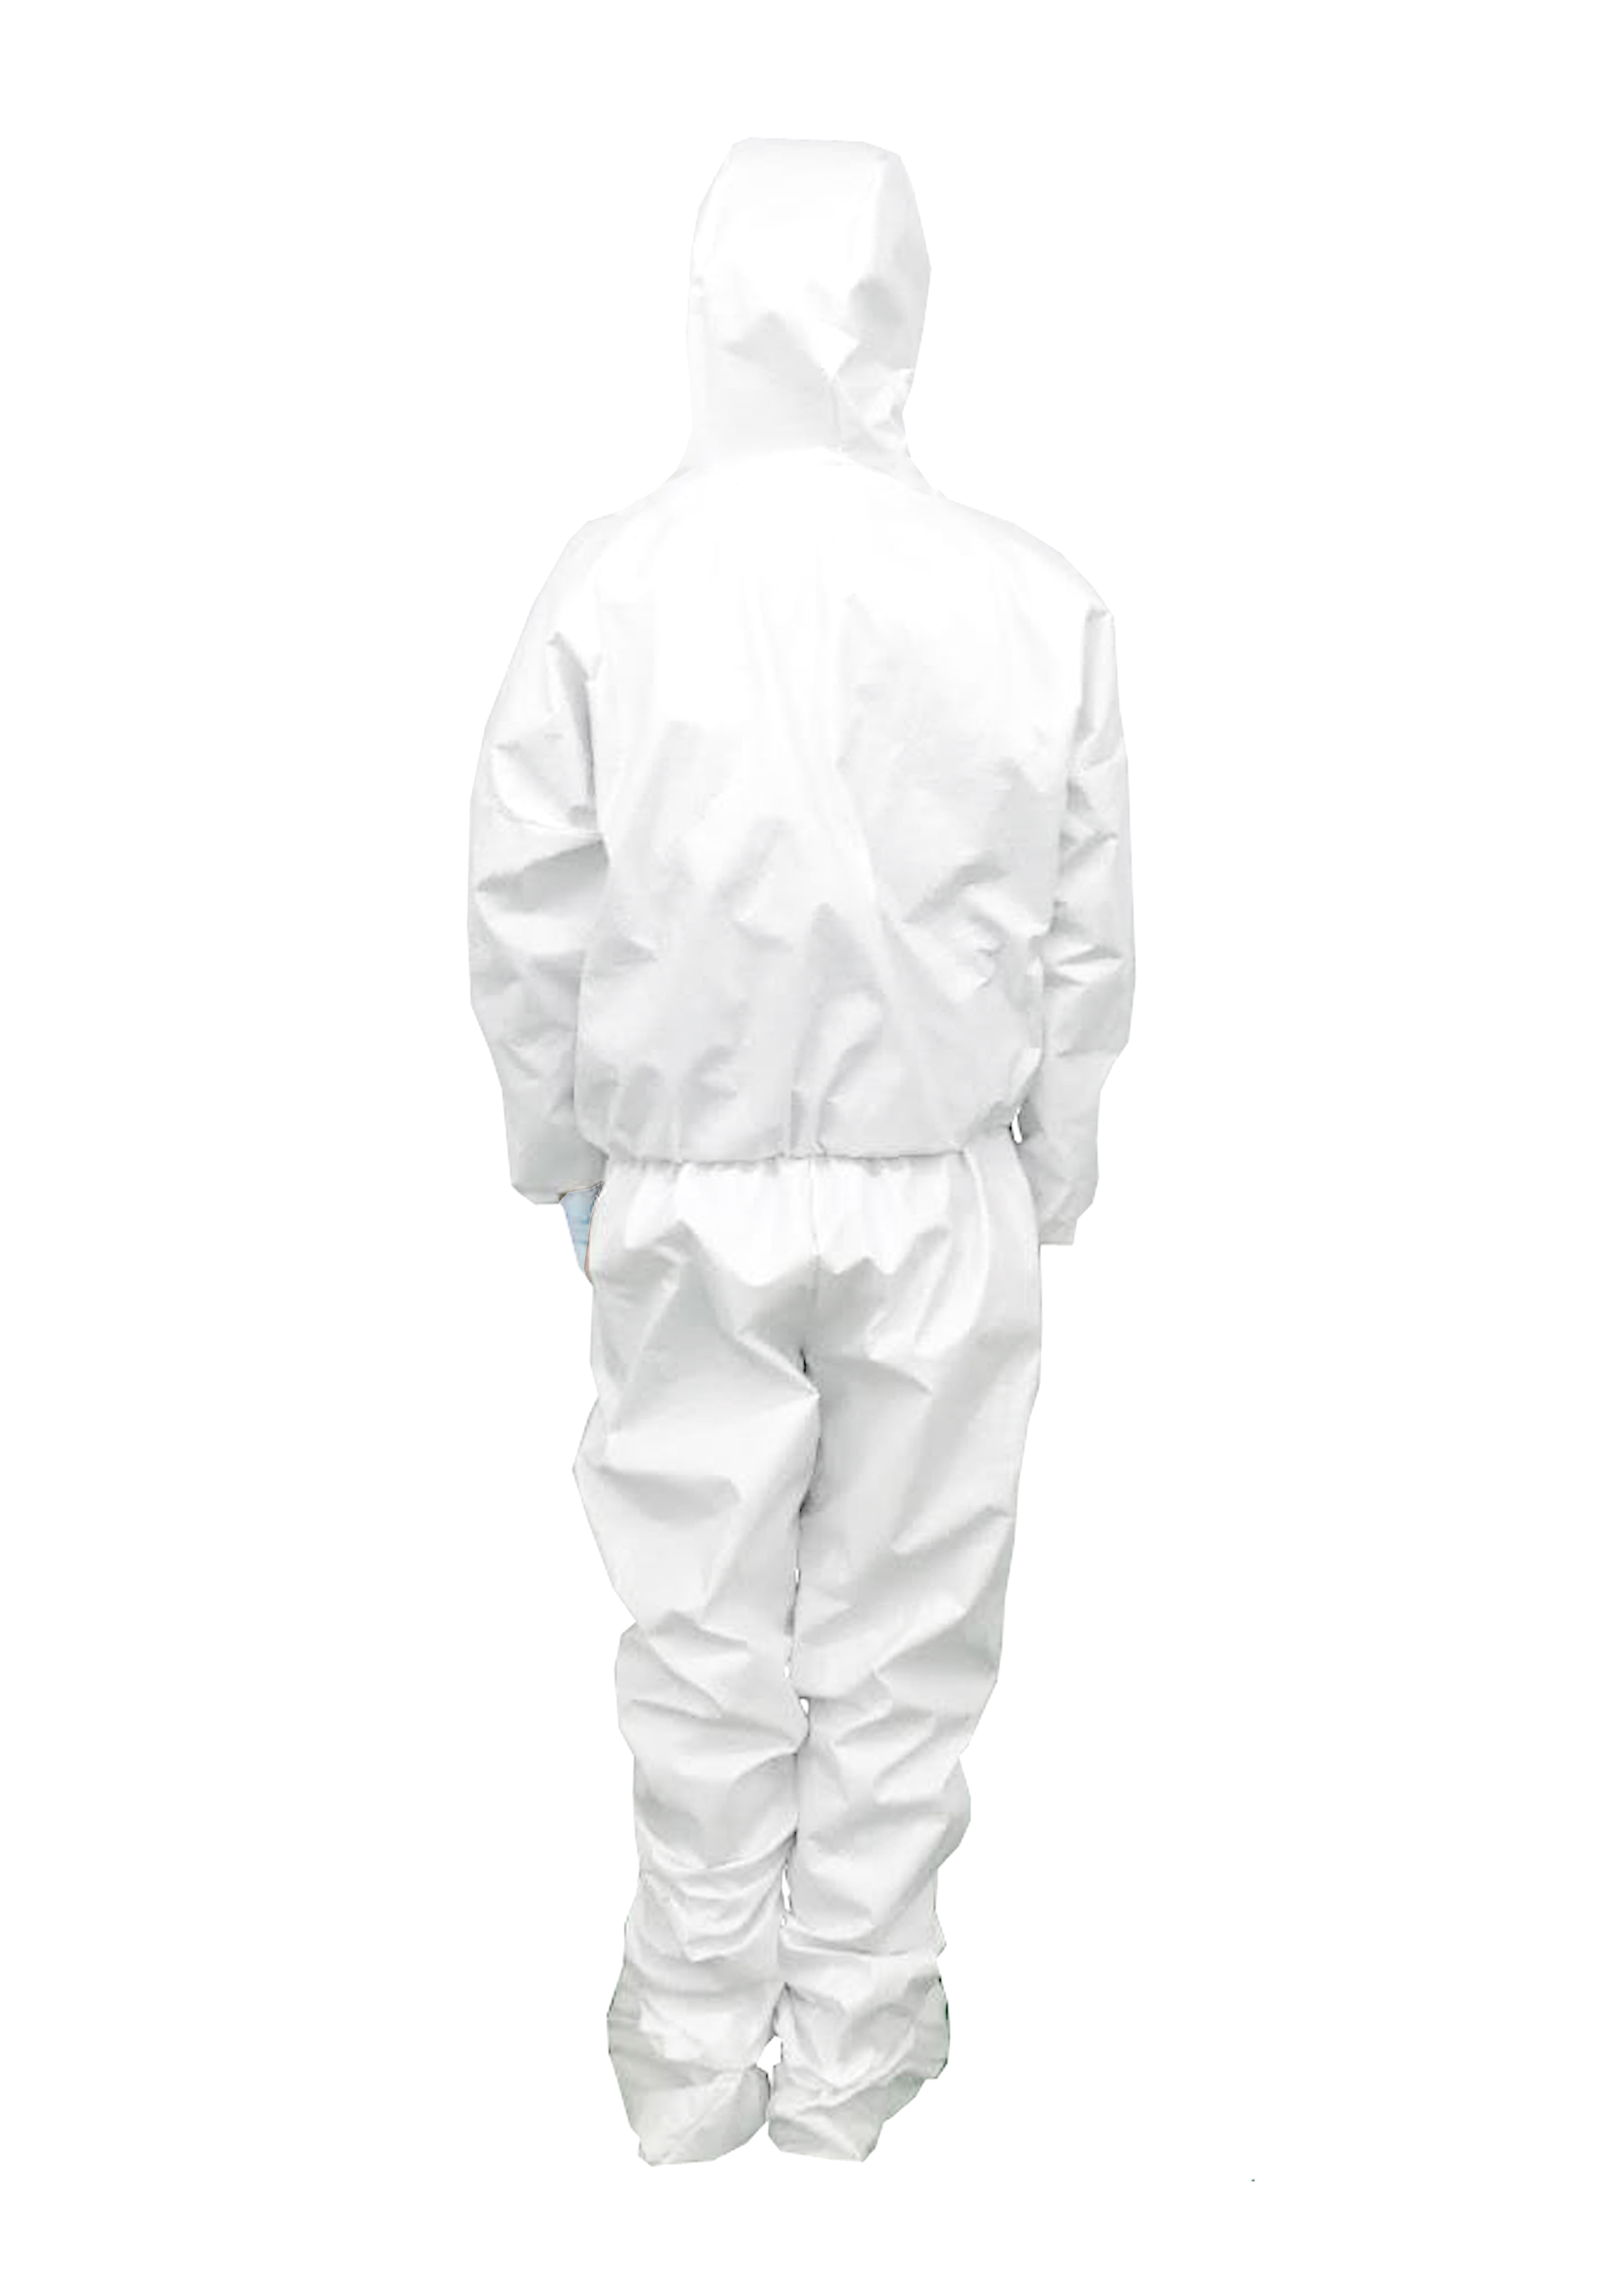 PP/PE Waterproof Liquid Resistance Antibacterial Non-woven Fabric Microporous Safety Protective Apparel Medical Coverall